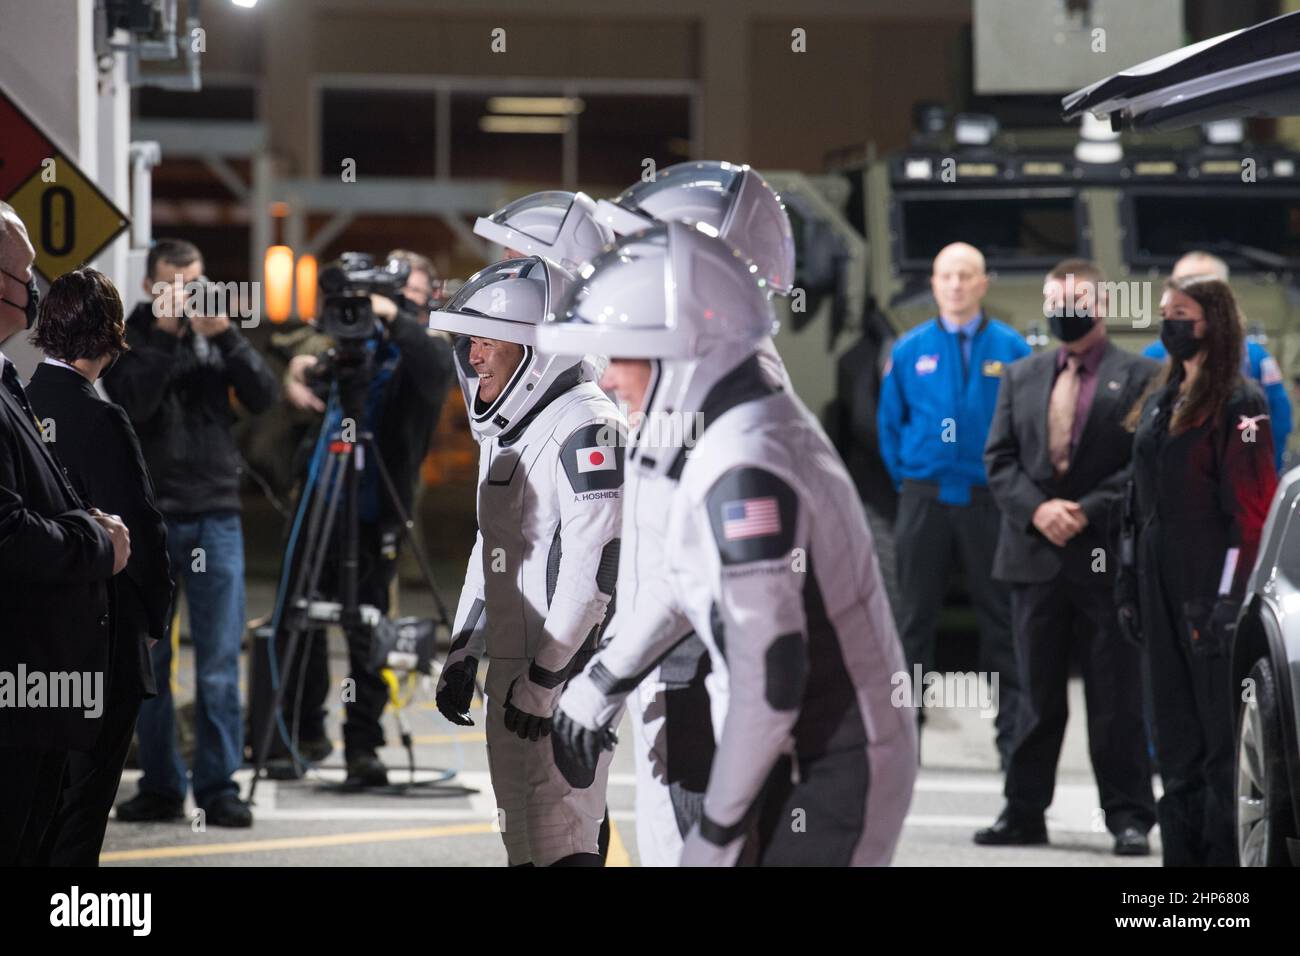 From left to right, ESA (European Space Agency) astronaut Thomas Pesquet, Japan Aerospace Exploration Agency (JAXA) astronaut Akihiko Hoshide, and NASA astronauts Shane Kimbrough and Megan McArthur, are seen as they prepare to depart the Neil  A. Armstrong Operations and Checkout Building for Launch Complex 39A to board the SpaceX Crew Dragon spacecraft for the Crew-2 mission launch, Friday, April 23, 2021, at NASA’s Kennedy Space Center in Florida. Stock Photo